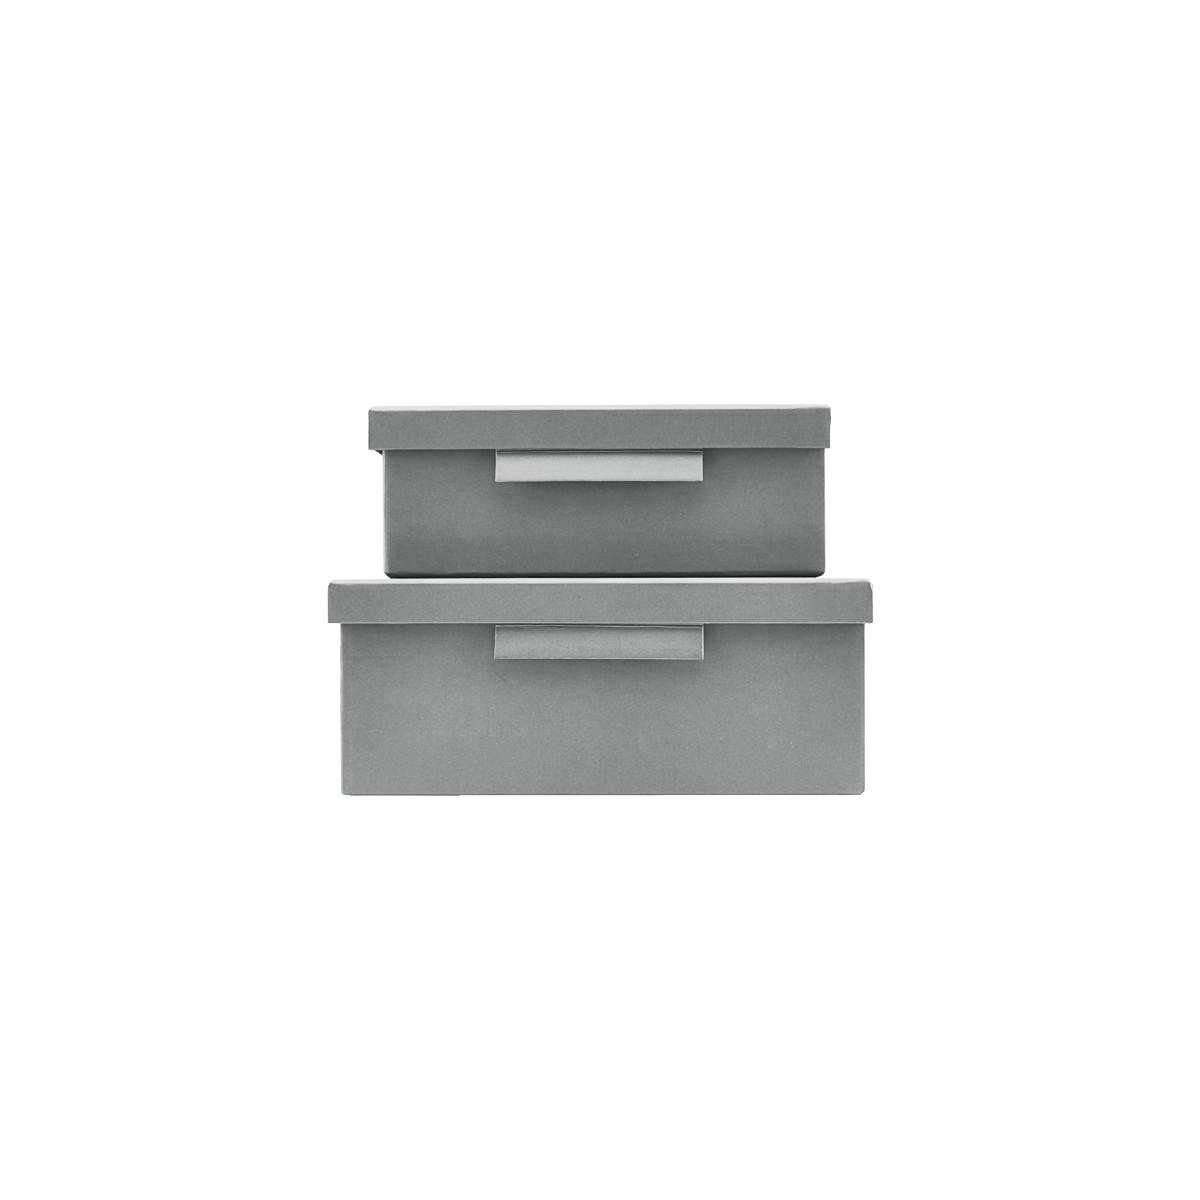 House Dcotor - File Box With Lid - Light Grey (402740011/402740011)